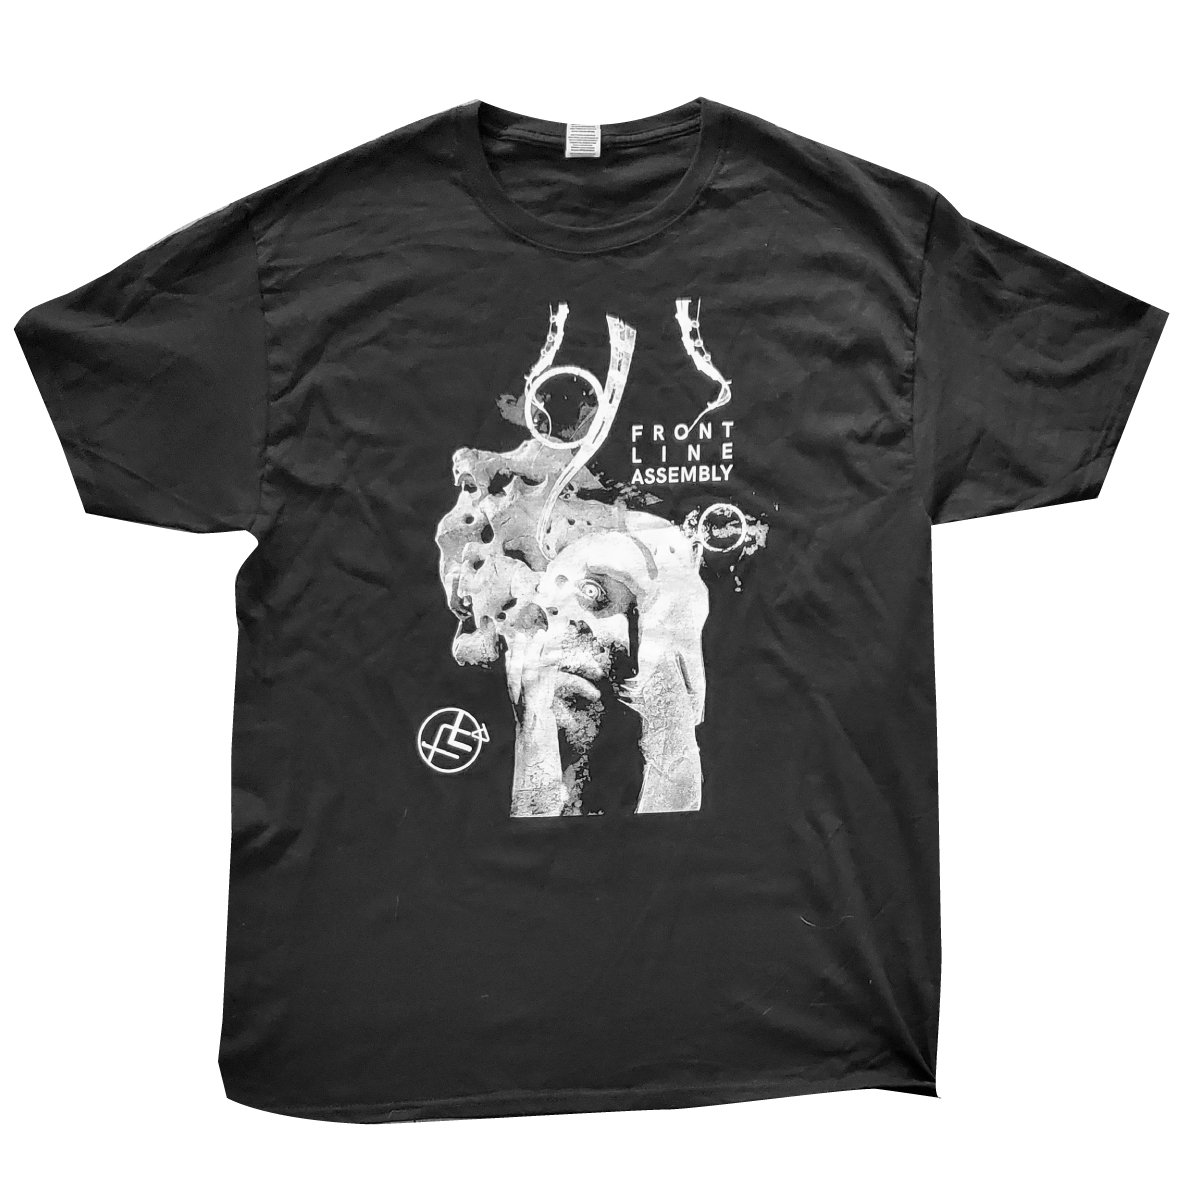 FRONT LINE ASSEMBLY-Caustic Grip Shirt/ NEW Reissued print | Wax Trax ...